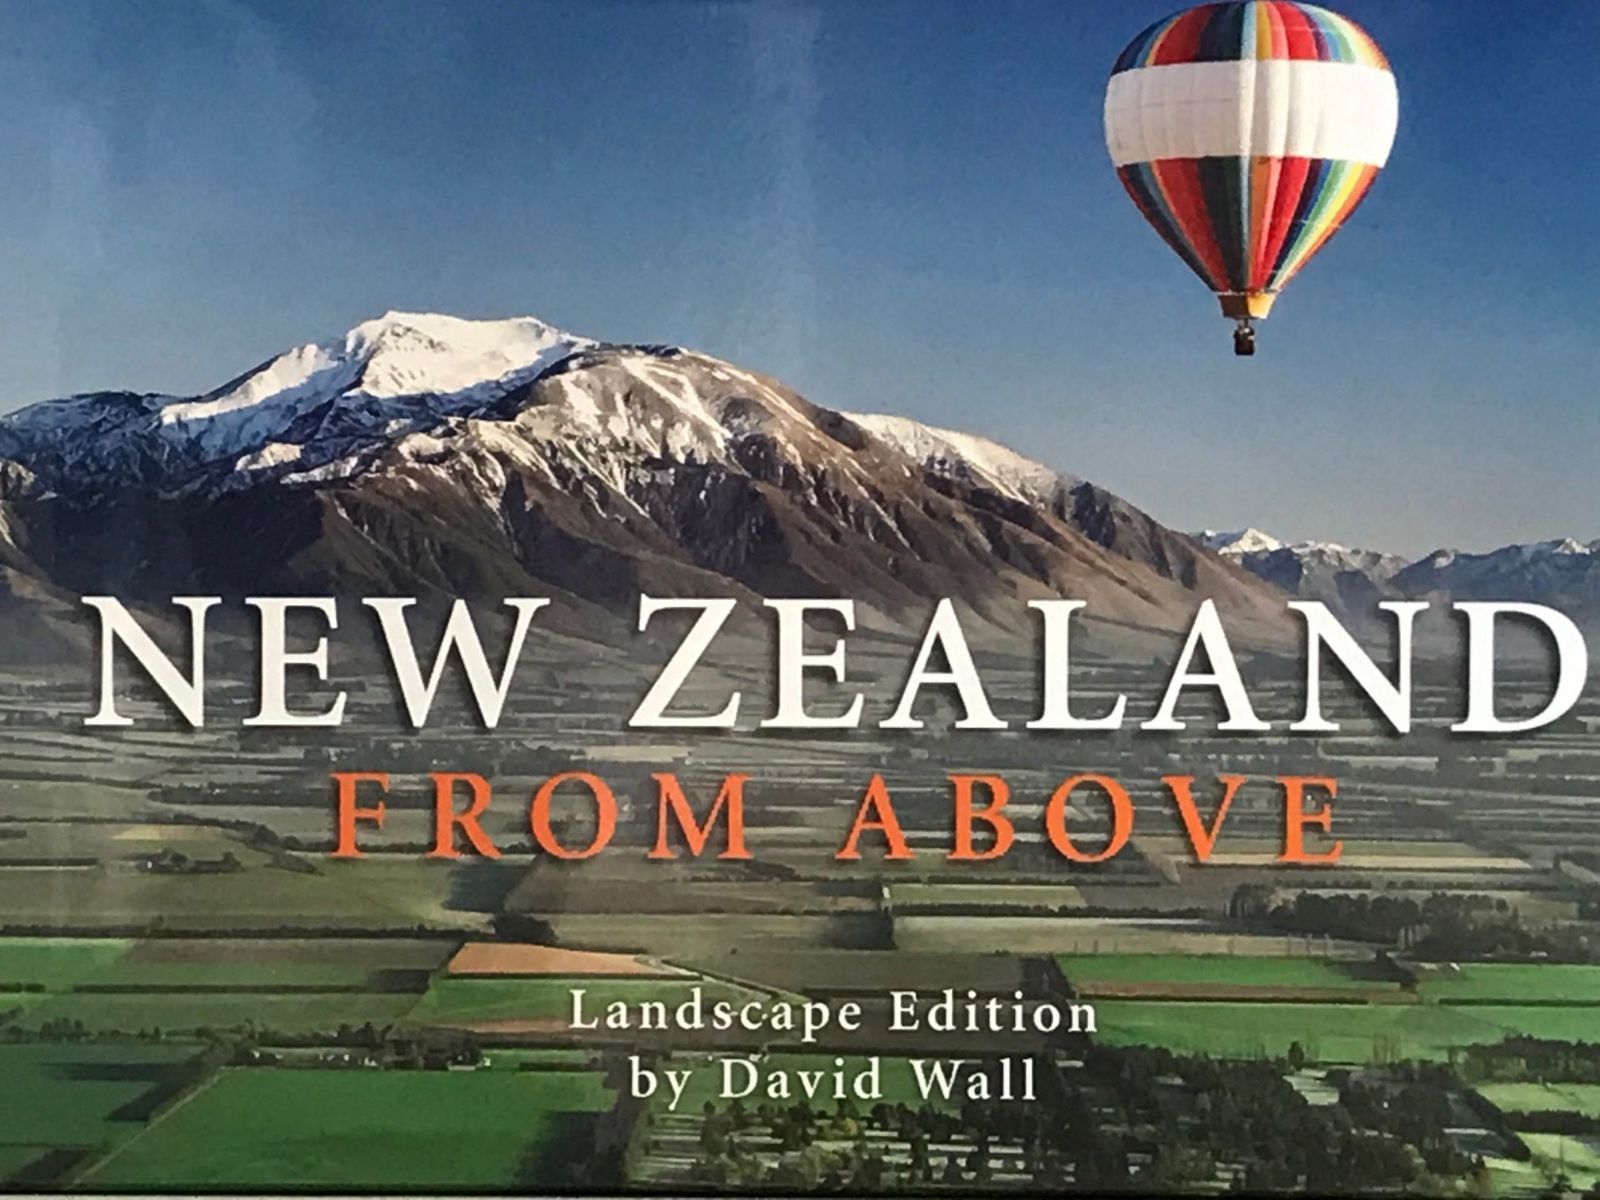 NEW ZEALAND FROM ABOVE: Landscape edition